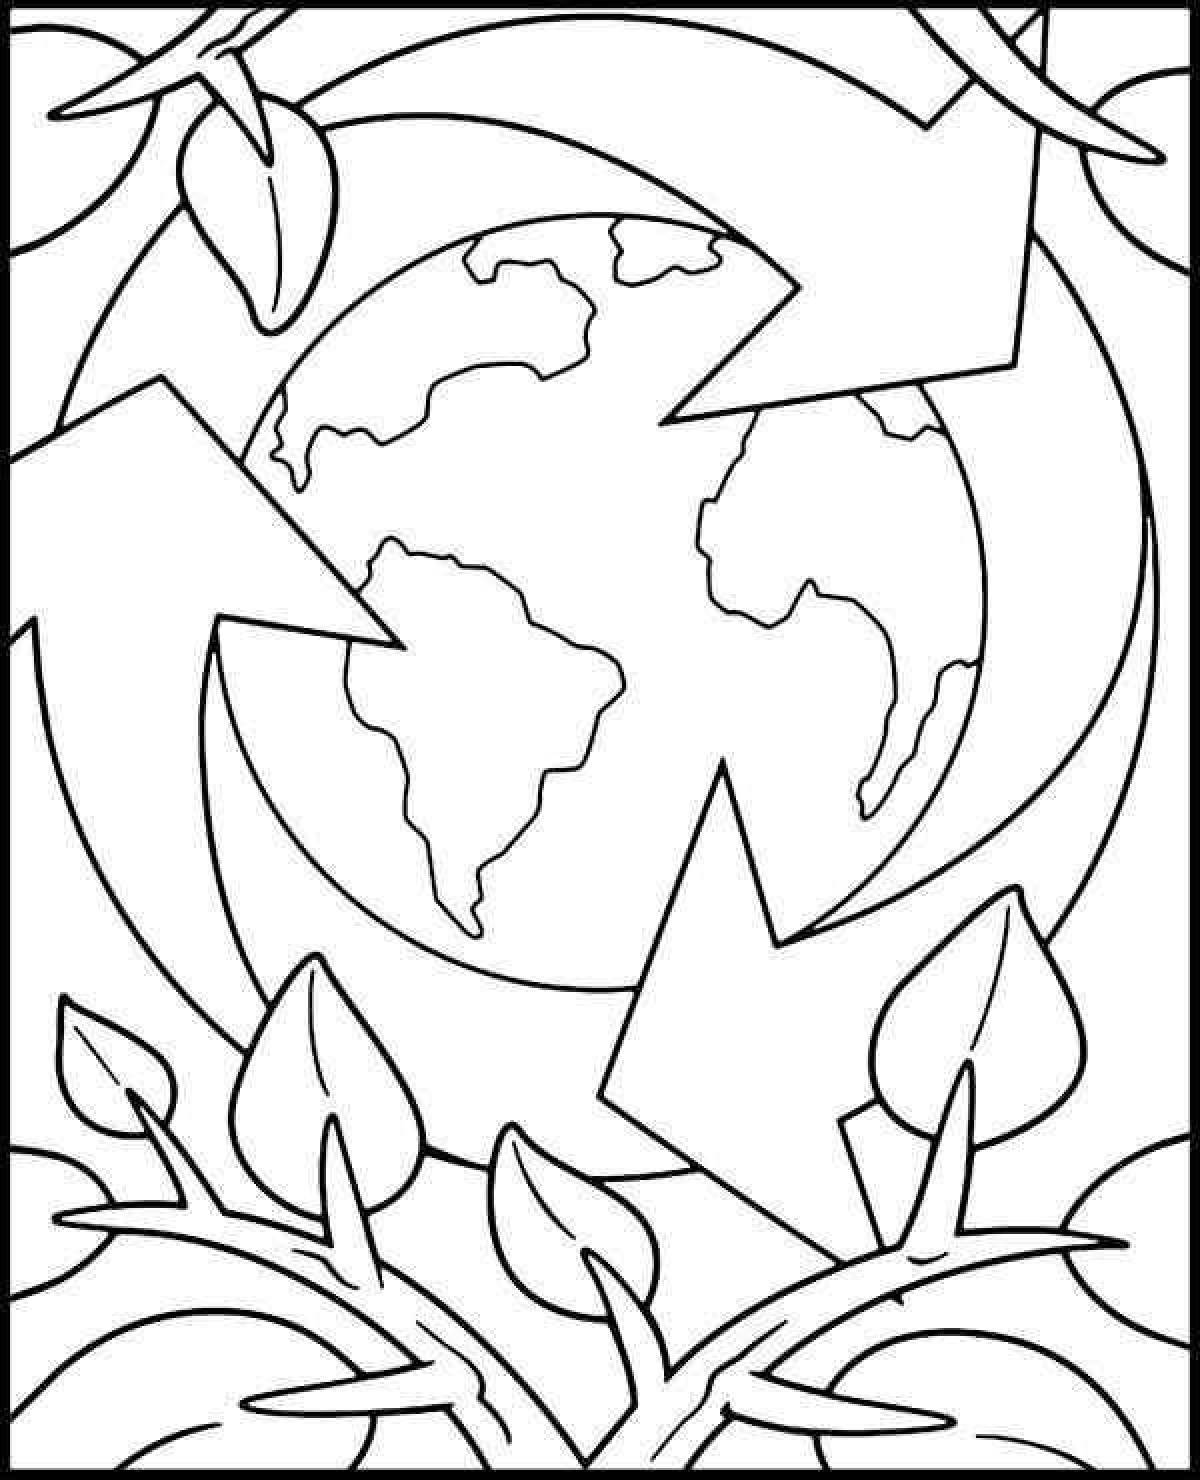 Fairy ecology coloring book